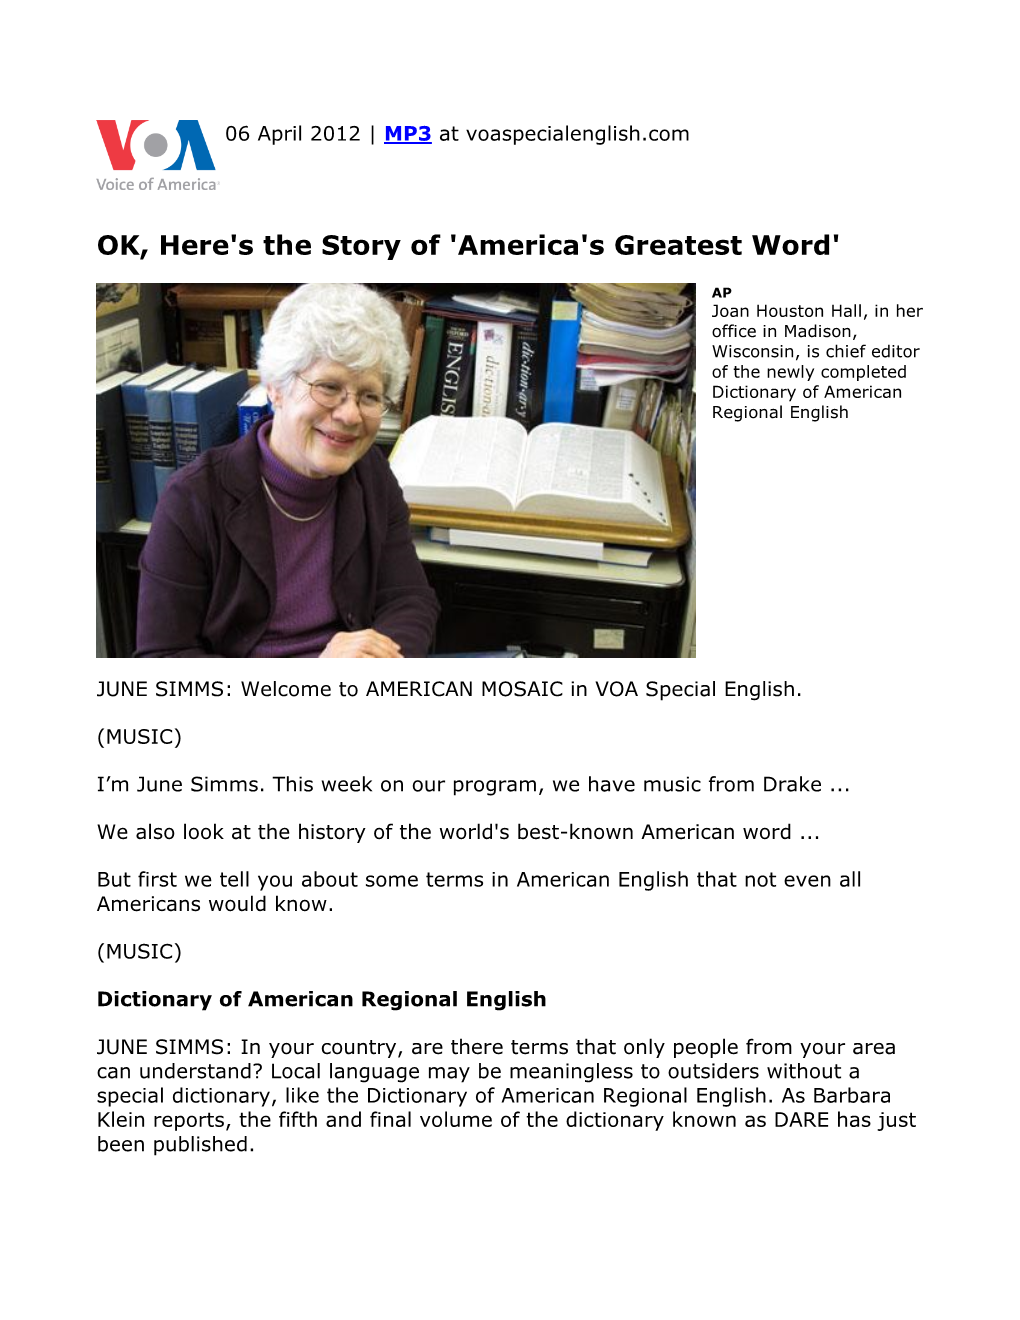 OK, Here's the Story of 'America's Greatest Word'